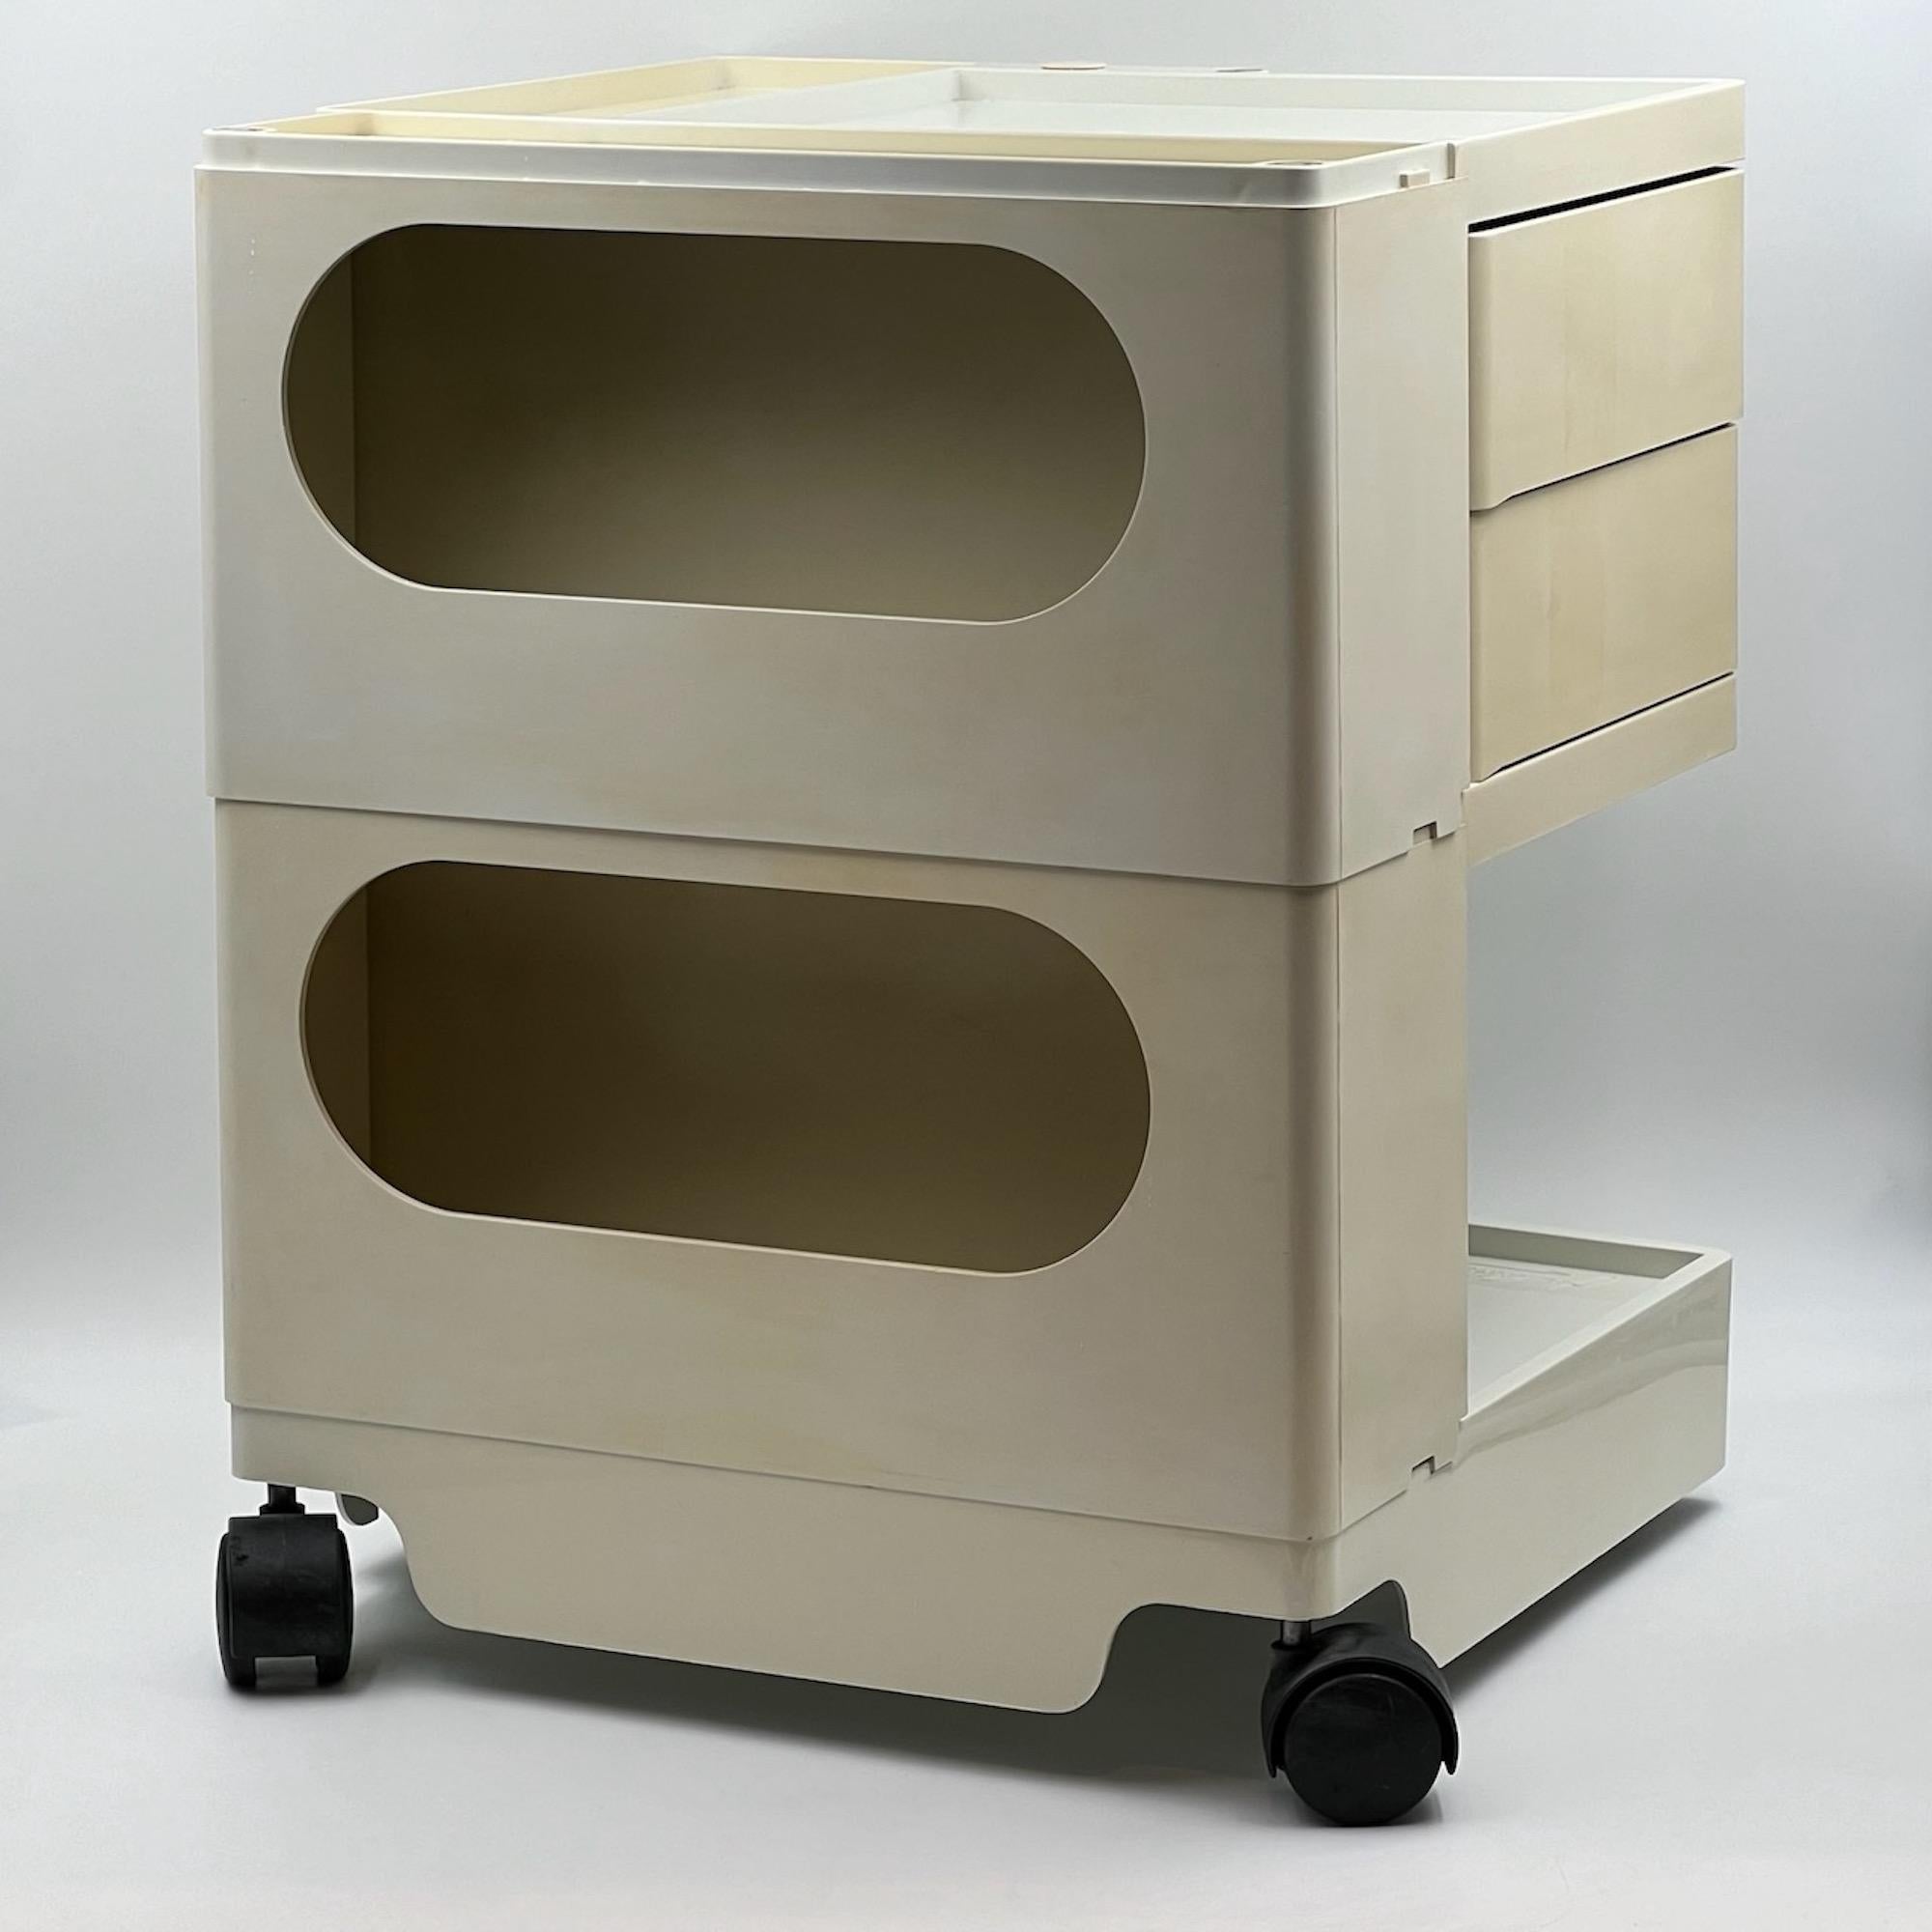 Iconic Boby Trolley by Joe Colombo - Space Age Award Winning Cabinet, 1970s In Good Condition For Sale In San Benedetto Del Tronto, IT